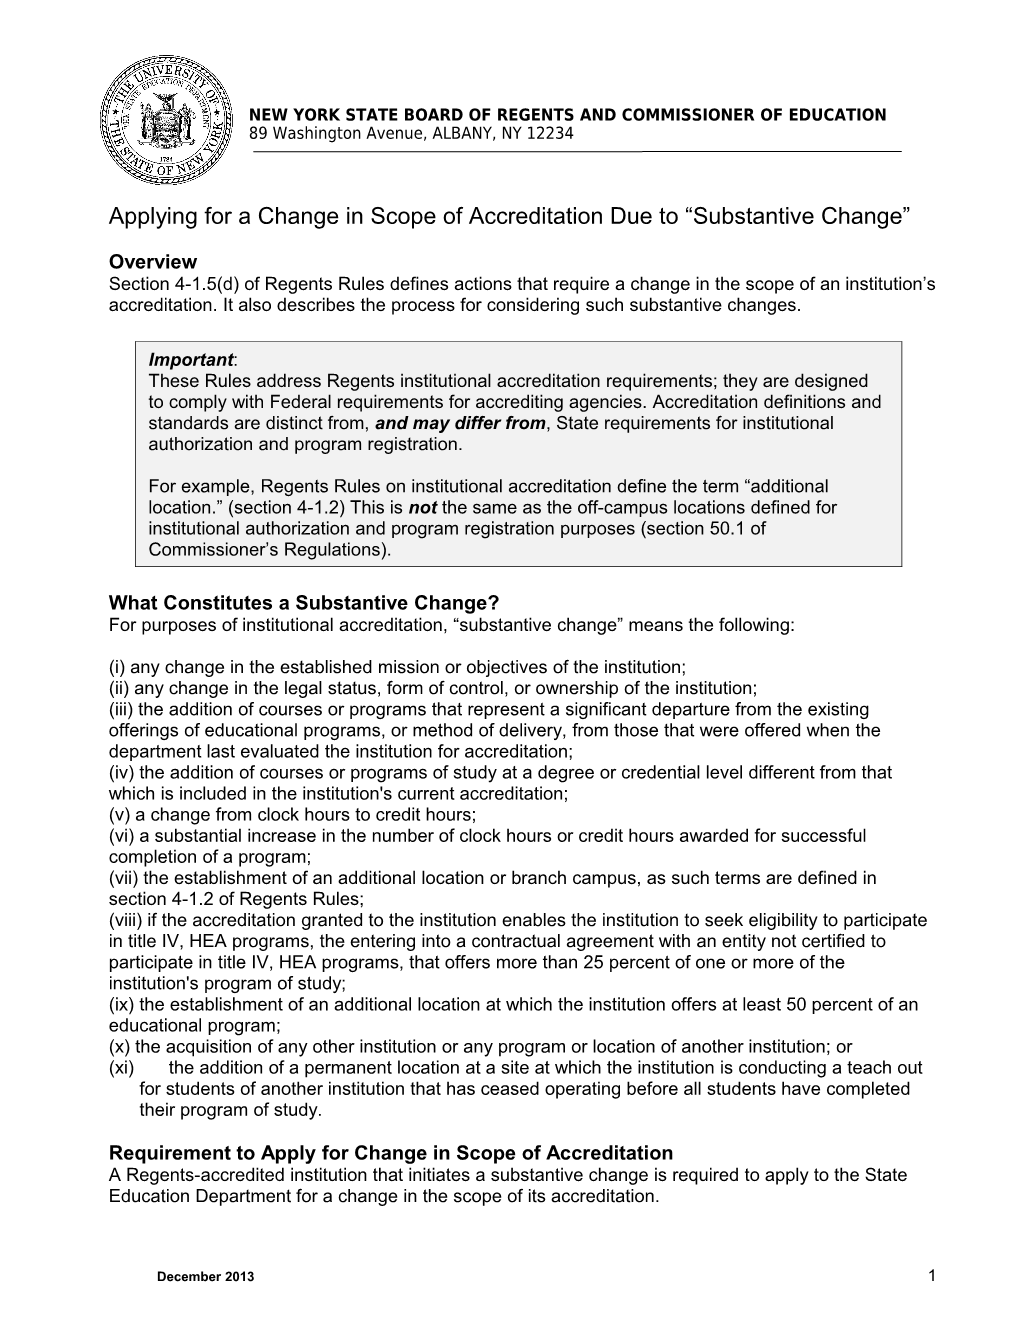 Applying for a Change in Scope of Accreditation Due to Substantive Change